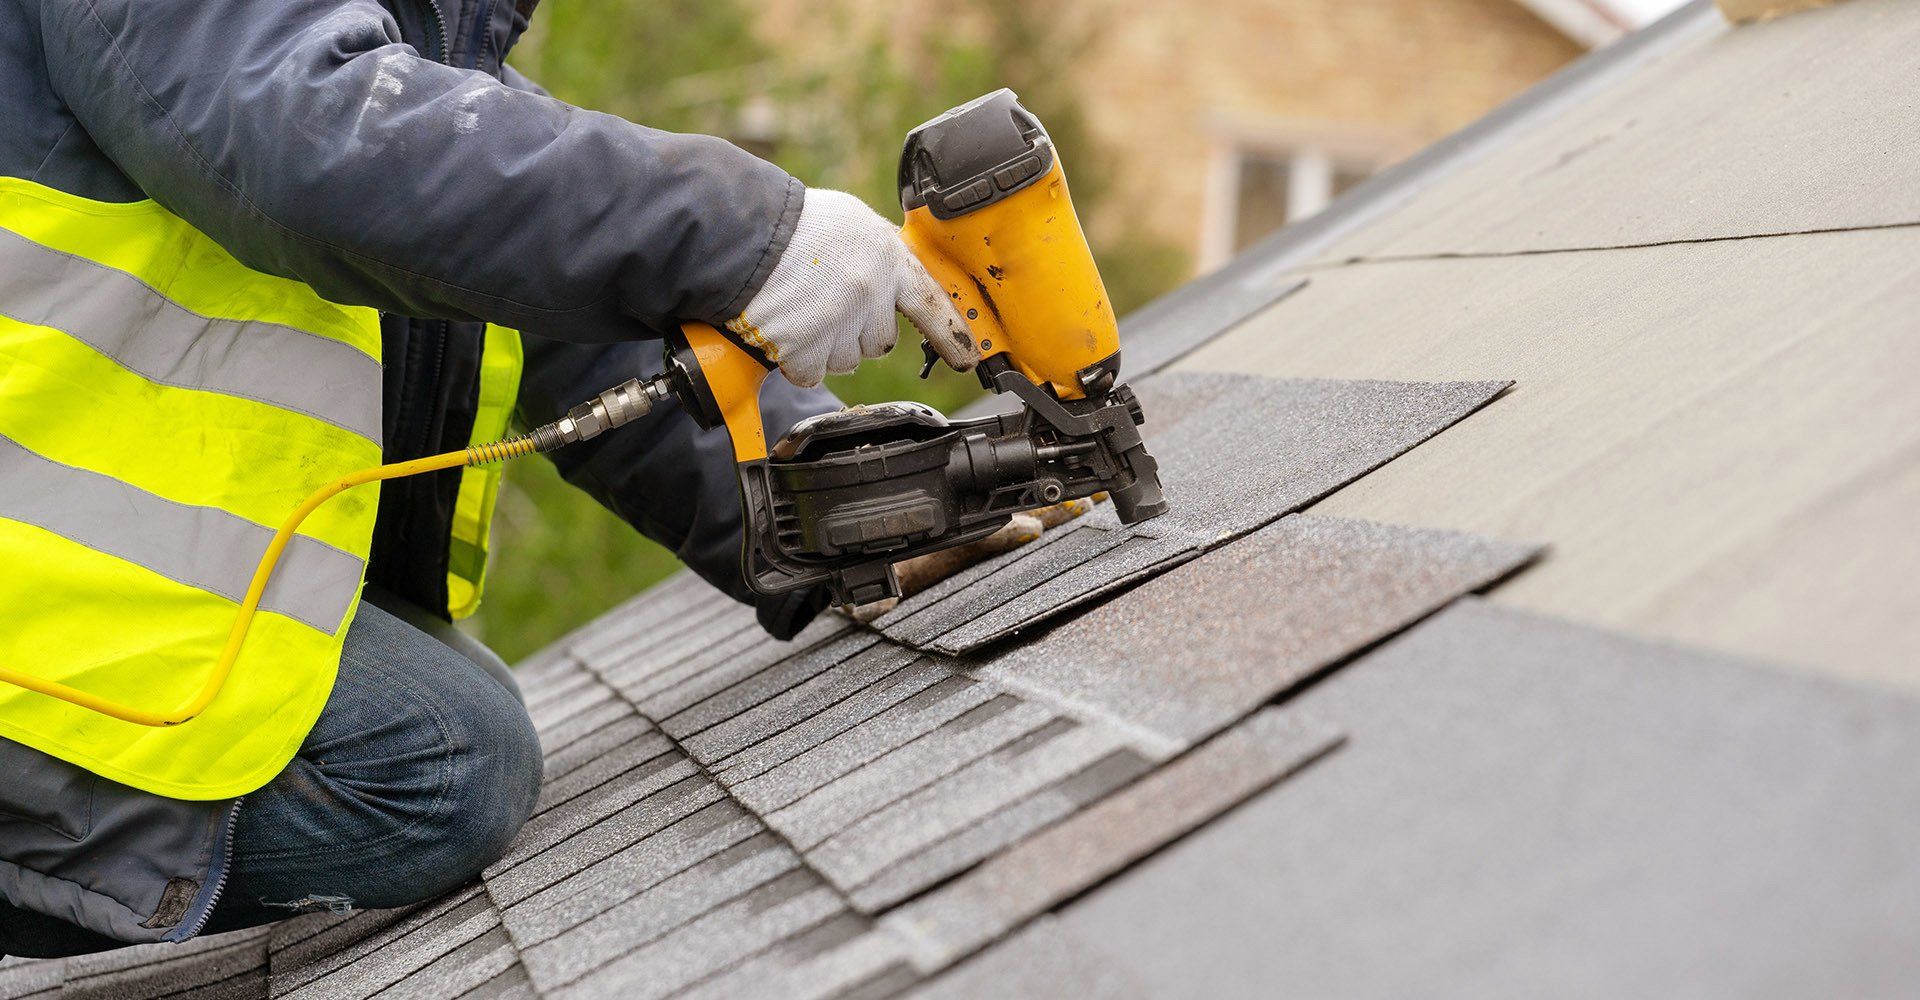 Roofing installations